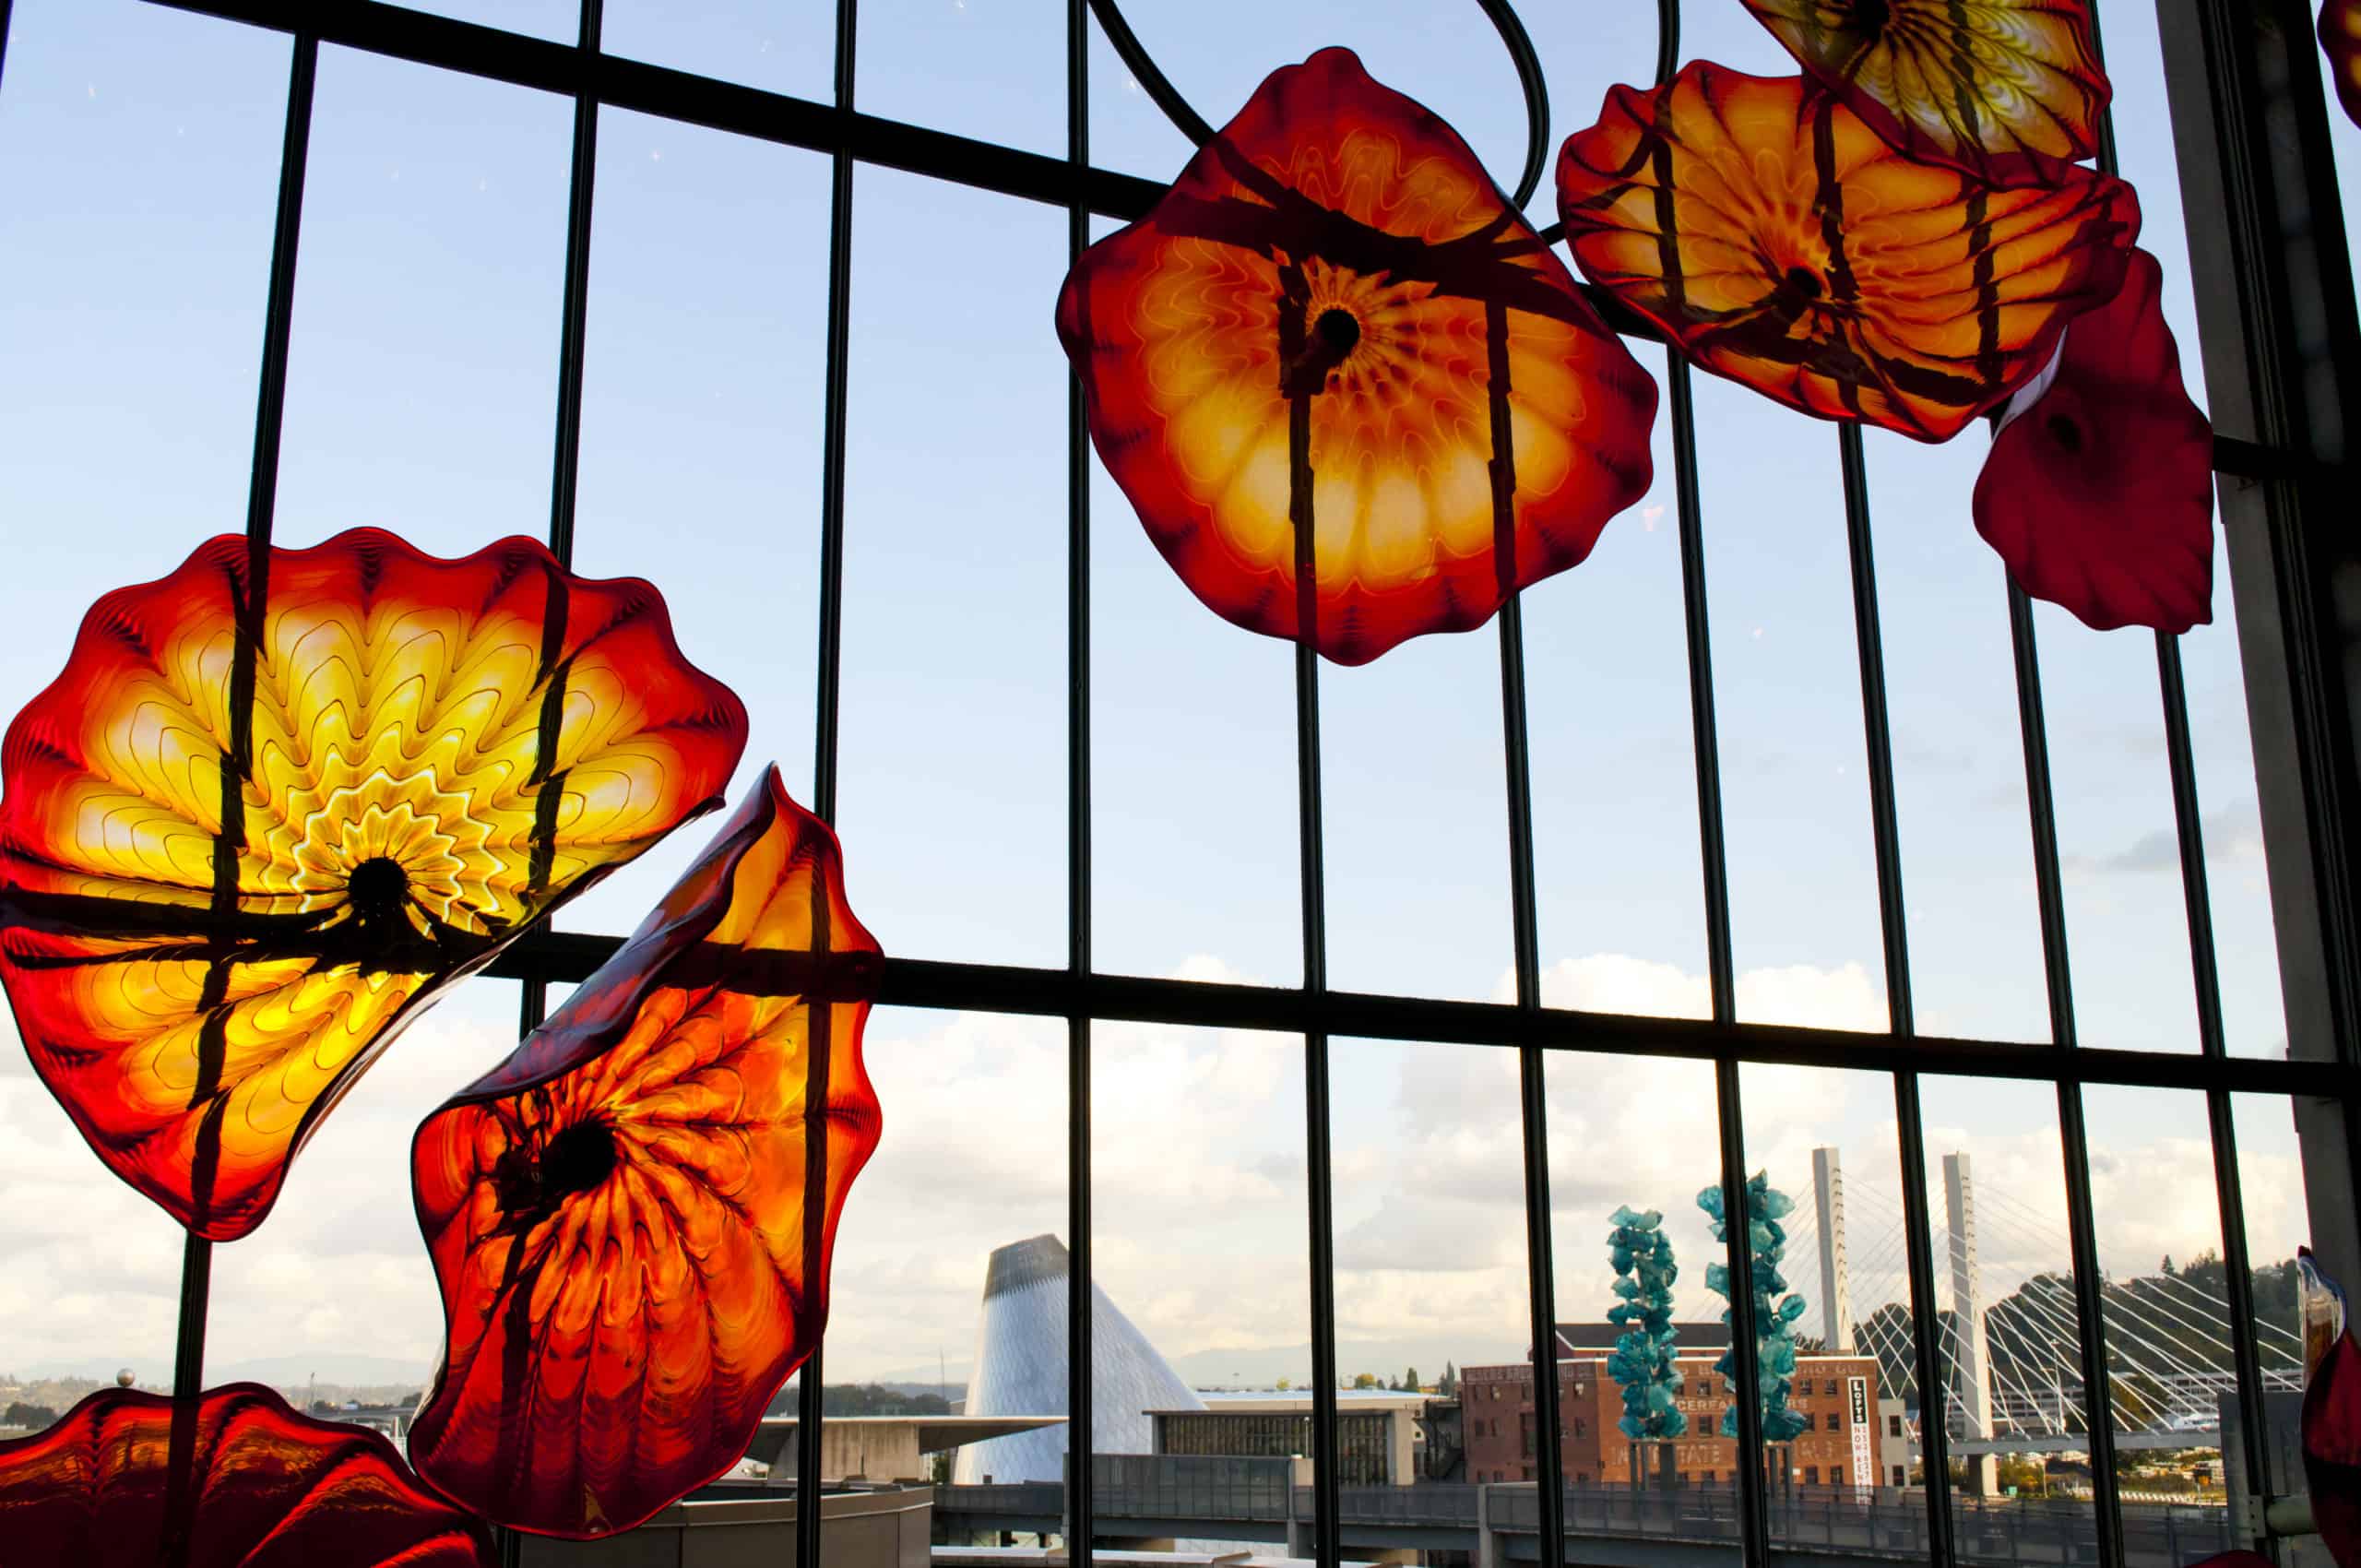 Best things to do in Tacoma Washington - Peggy Cleveland - Dale Chihuly artwork in Union Station courtesy of Travel Tacoma